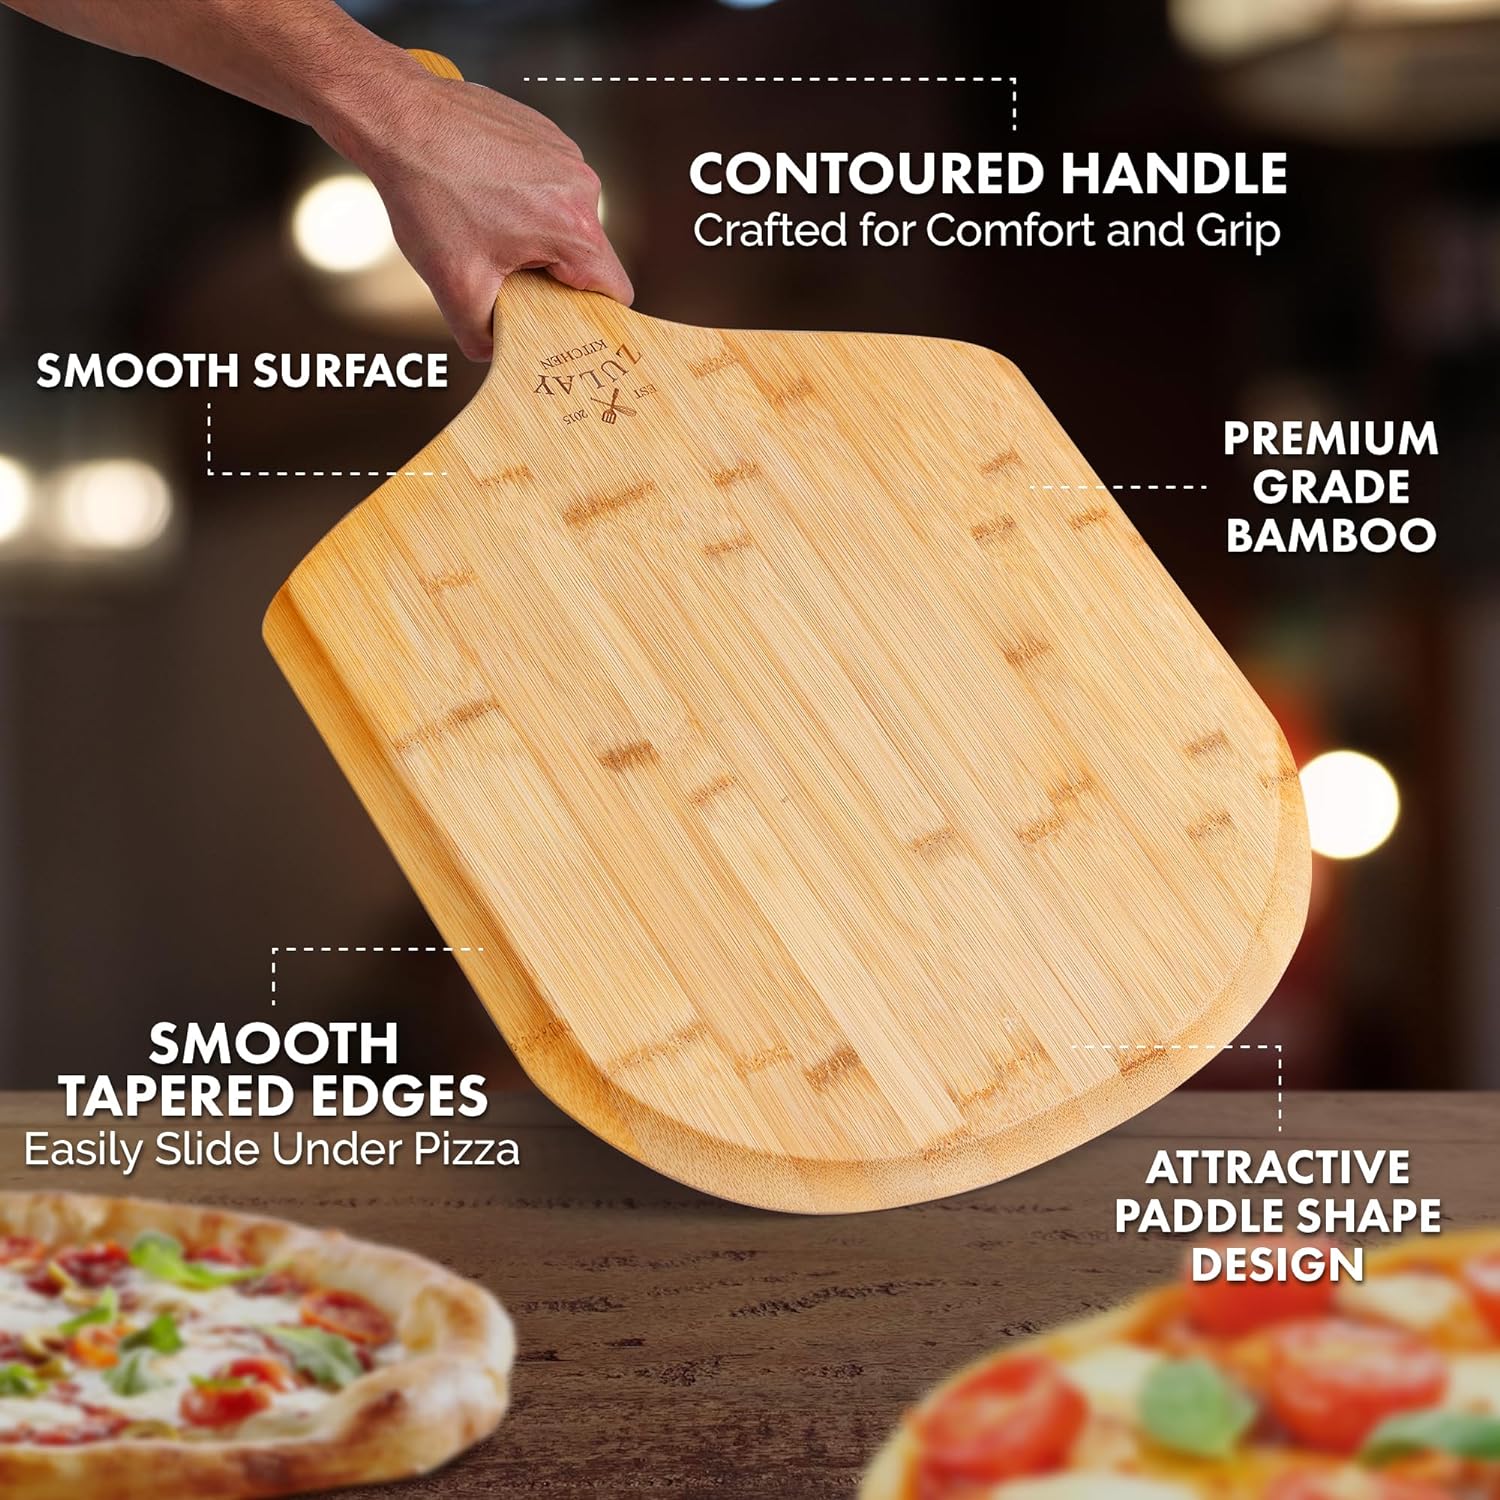 High quality Bamboo Pizza Peel by Zulay Kitchen